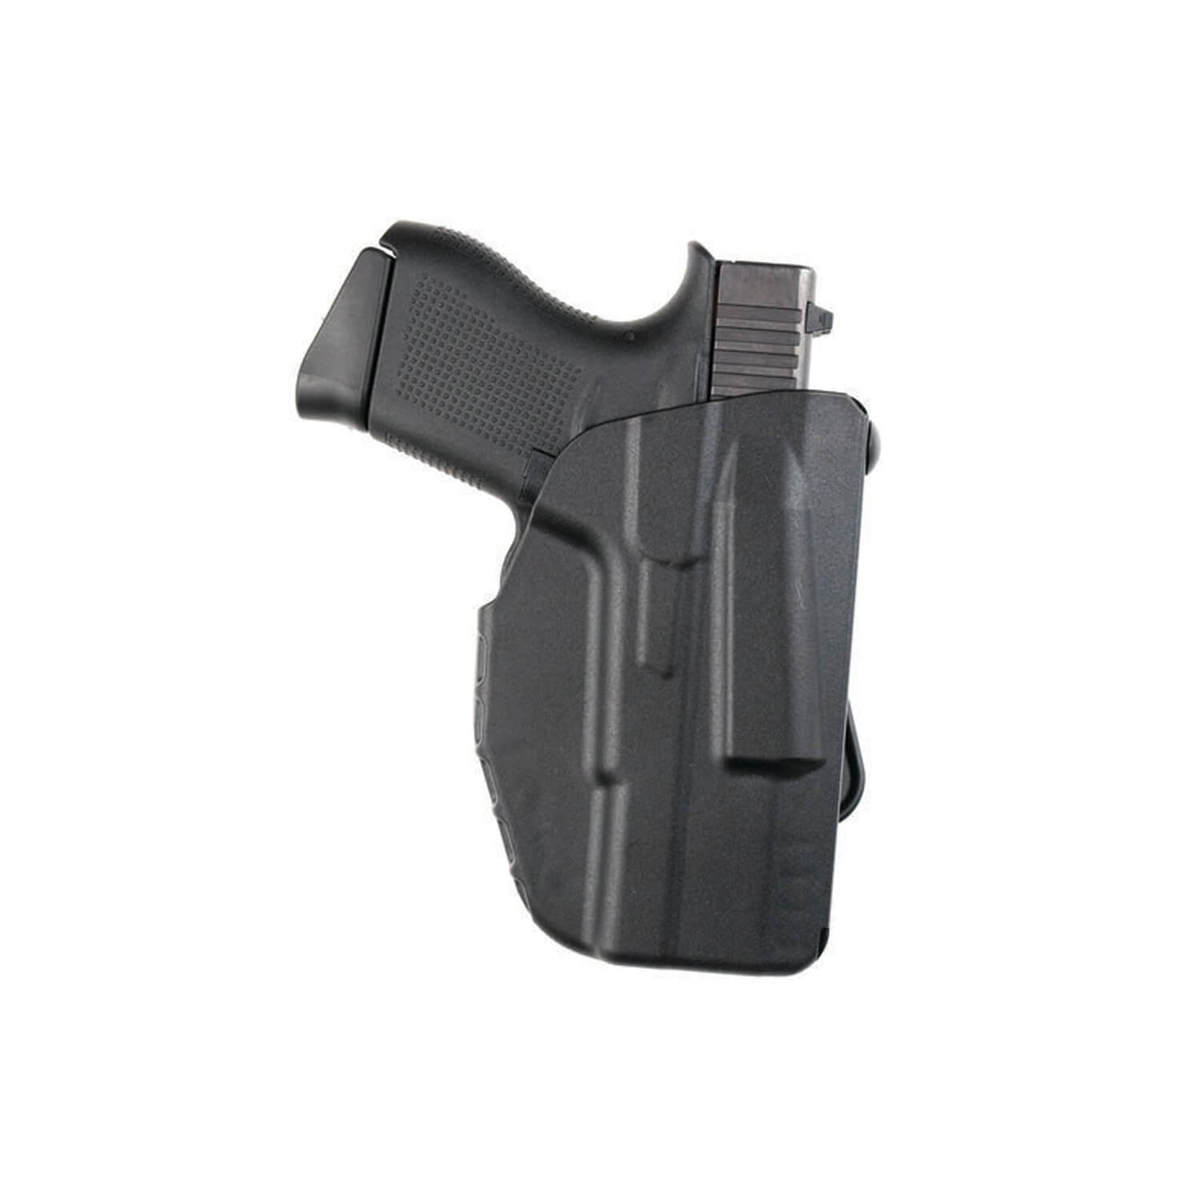 Safariland Paddle Holster 7371 Ruger Lc9 Right Hand for sale online